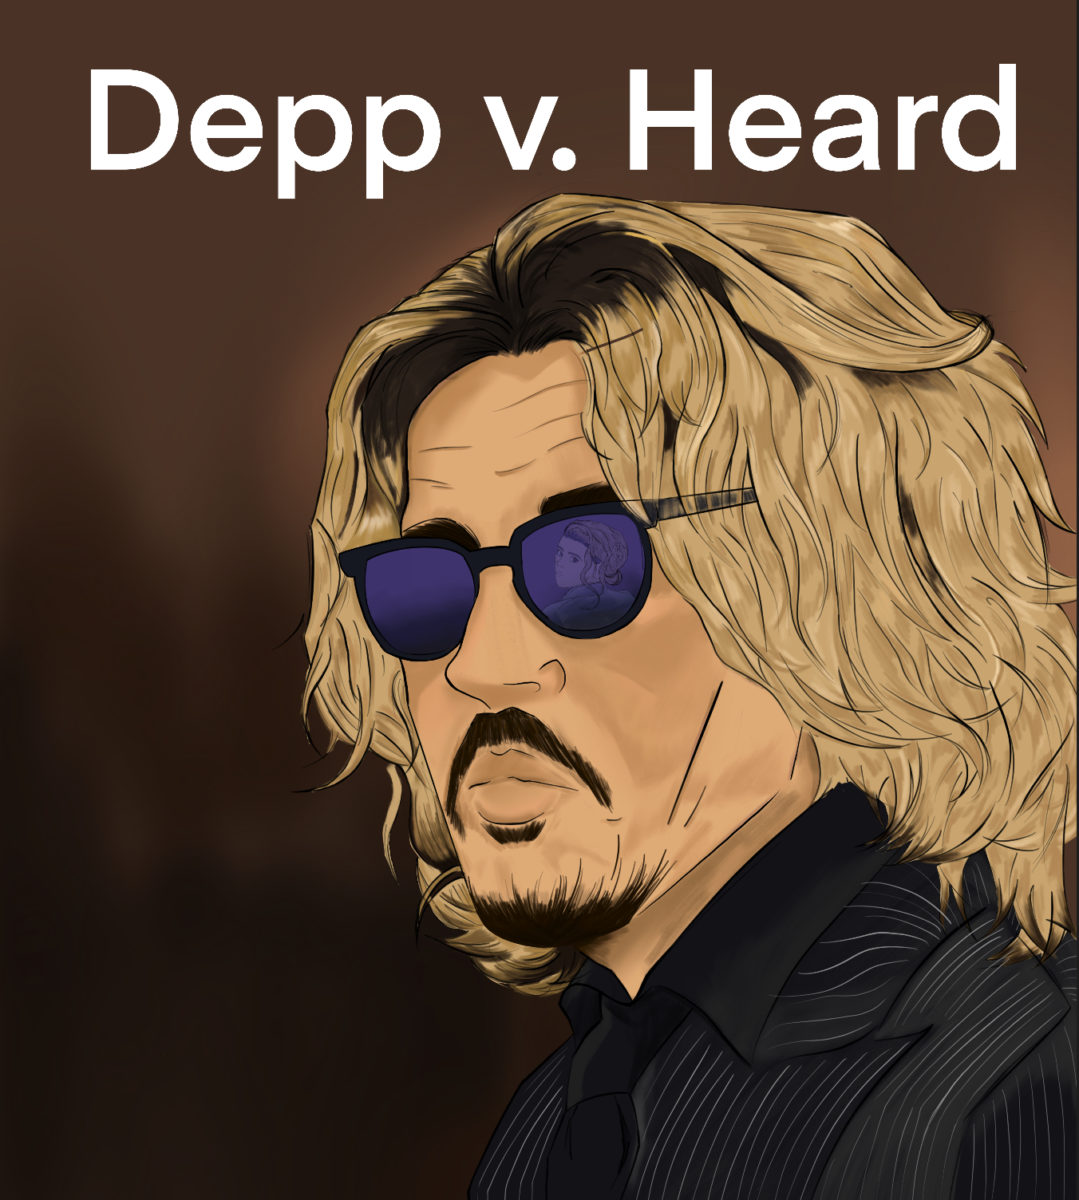 An+illustration+depicting+Johnny+Depp+during+the+trial.+Amber+Heard+is+seen+in+the+reflection+of+his+sunglasses.+